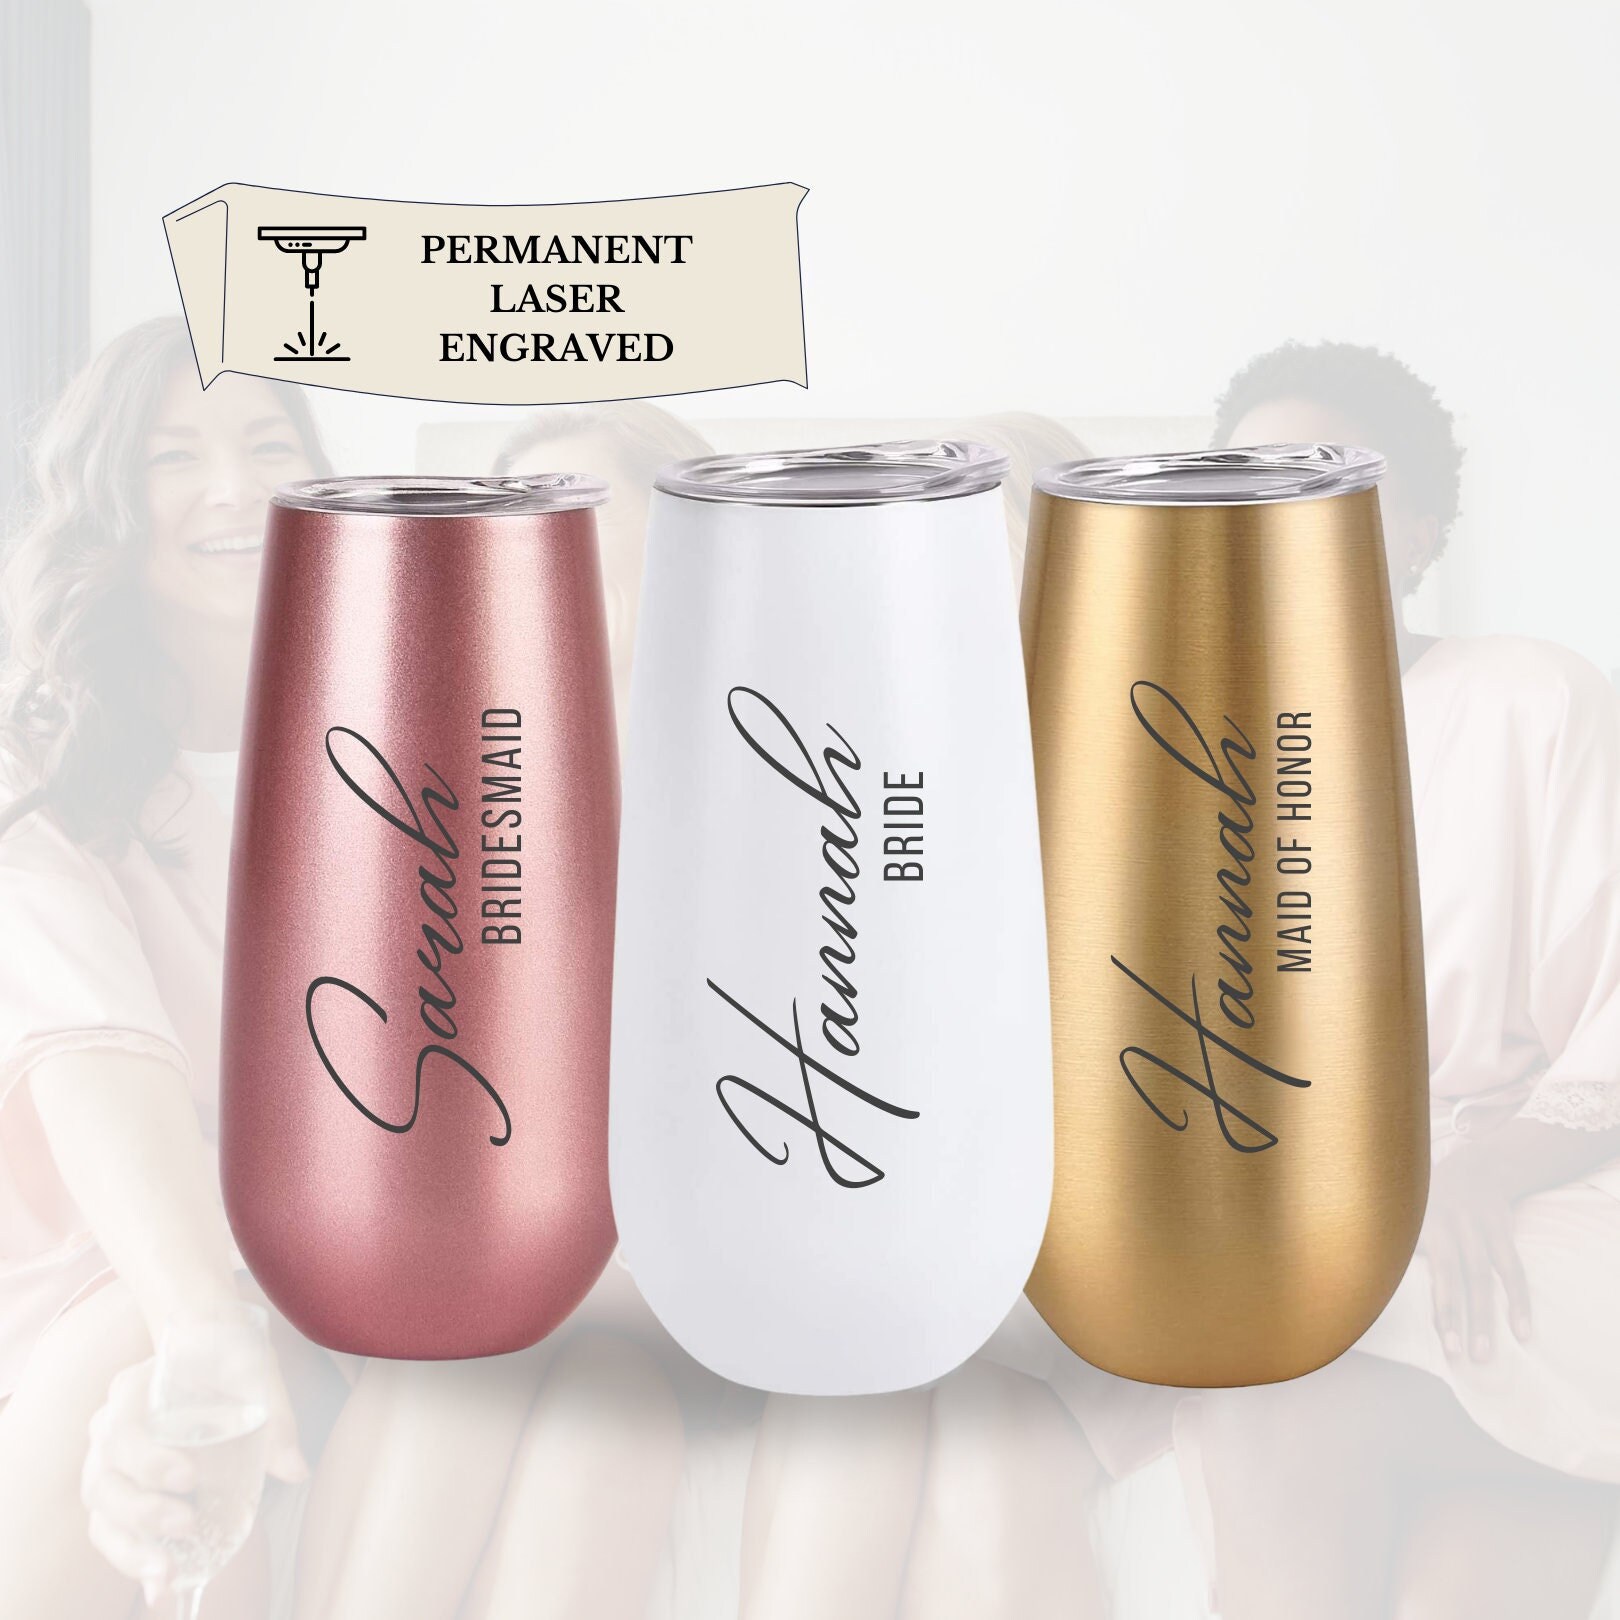 Rose Gold Champagne Flutes / Bridesmaid Proposal Glasses / Personalized  Champagne Glass / Bridesmaid Gift / Stainless Steel Champagne Flutes 